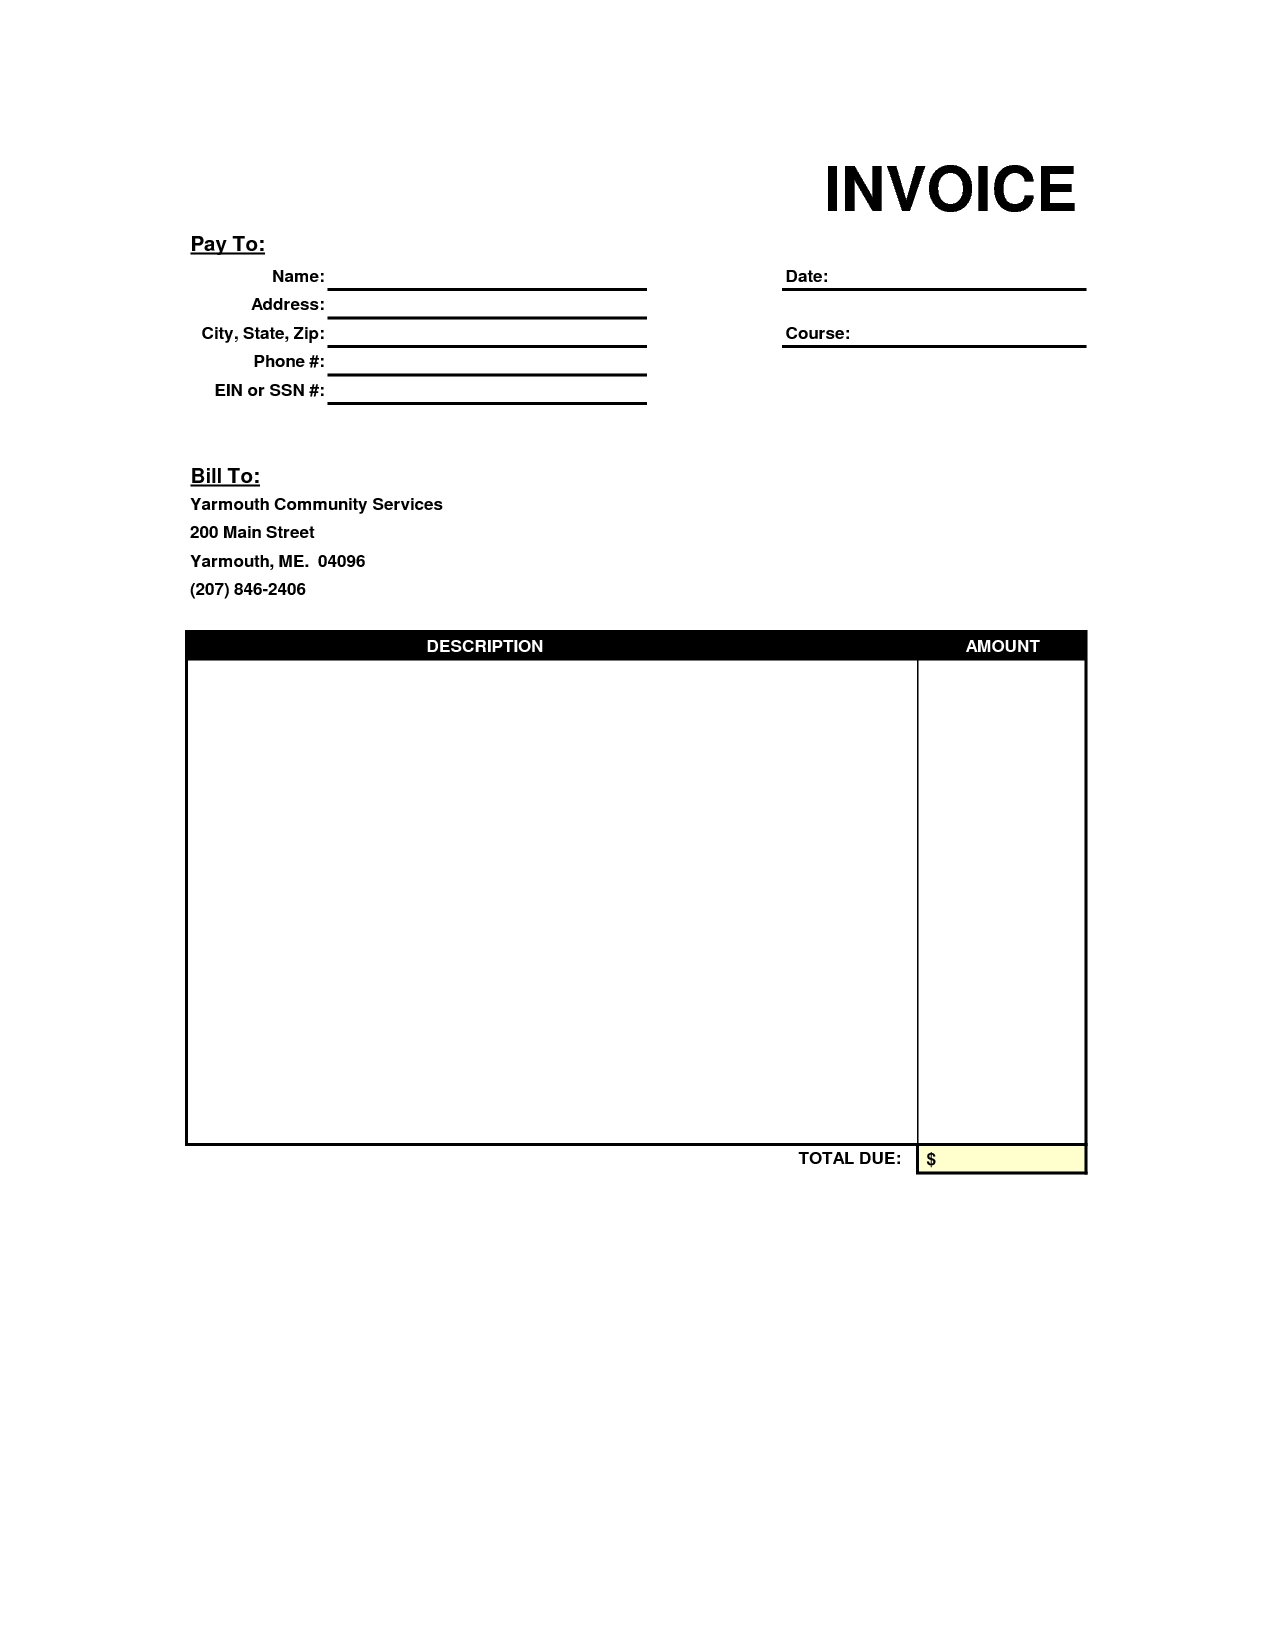 blank invoice template blank invoice free sample invoice template